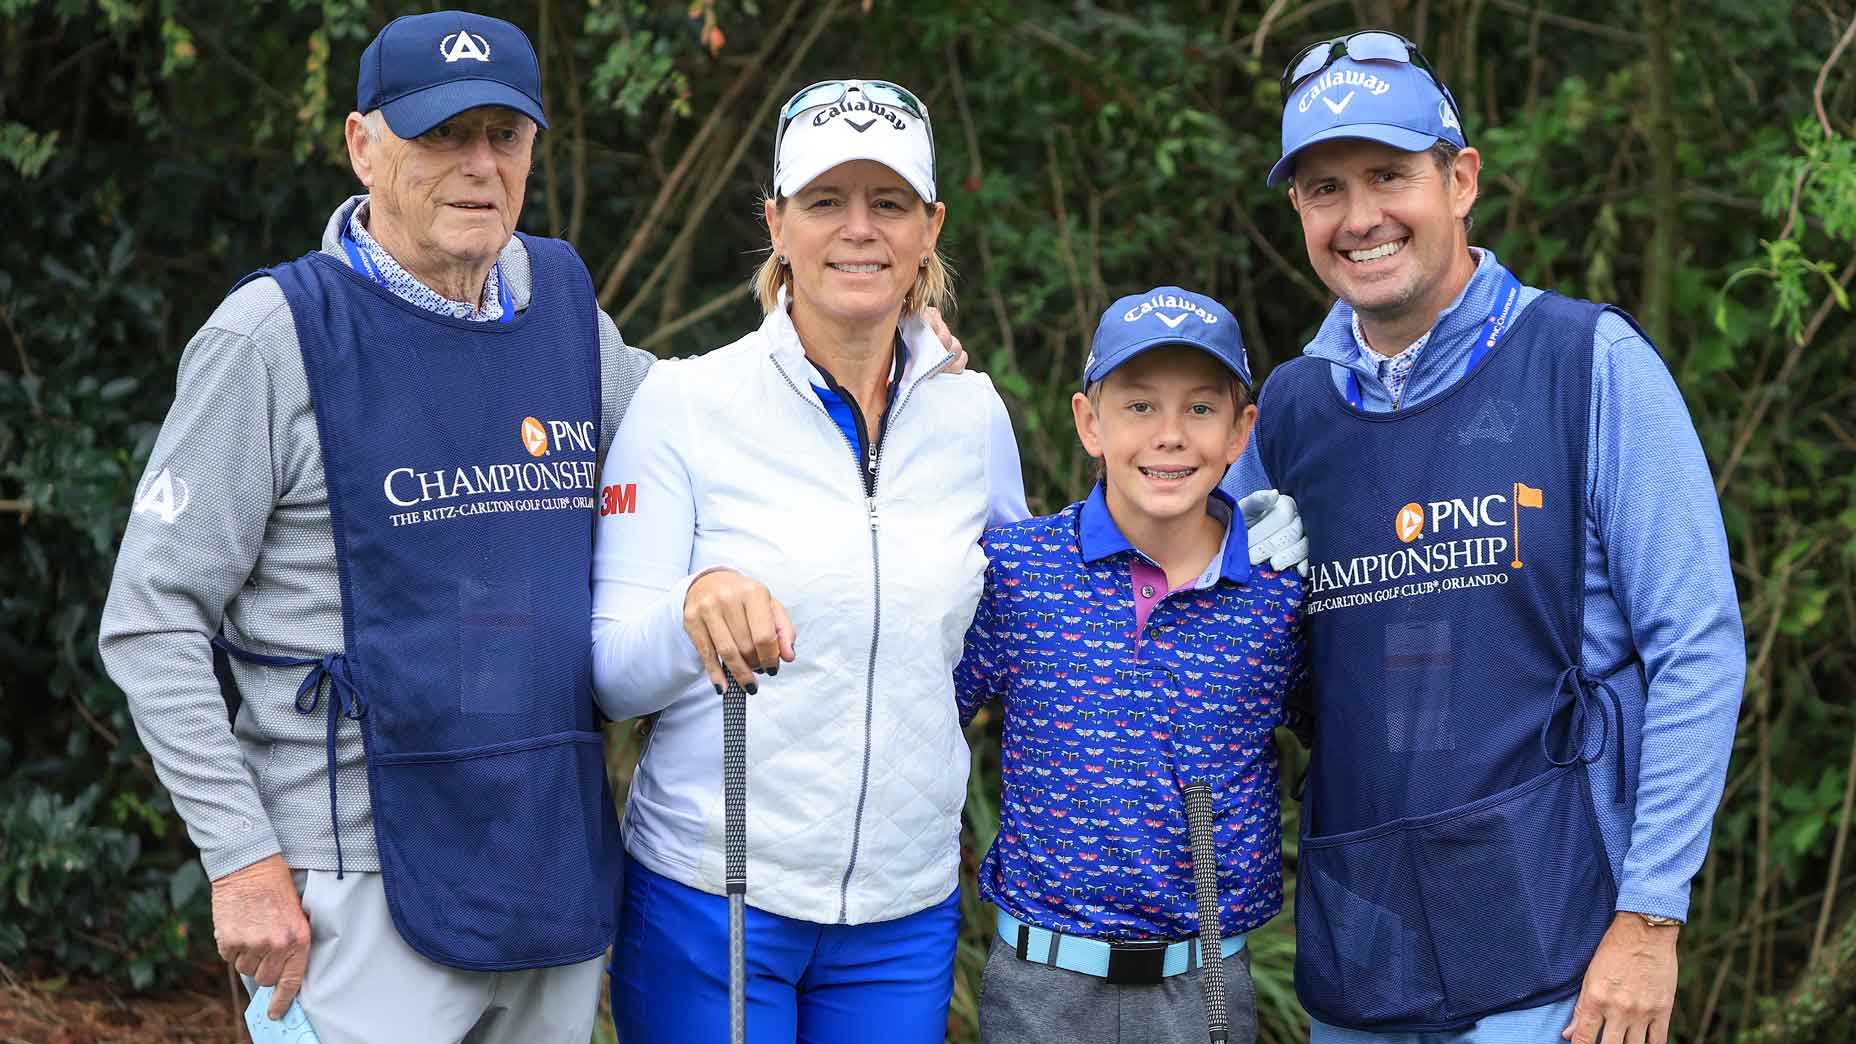 Annika Sorenstam of Sweden poses for a photograph with her son Will McGee, her grandfather Tom Sorenstam and her husband Mike McGee on the first tee during the final round of the PNC Championship at The Ritz-Carlton Golf Club on December 17, 2023 in Orlando, Florida.